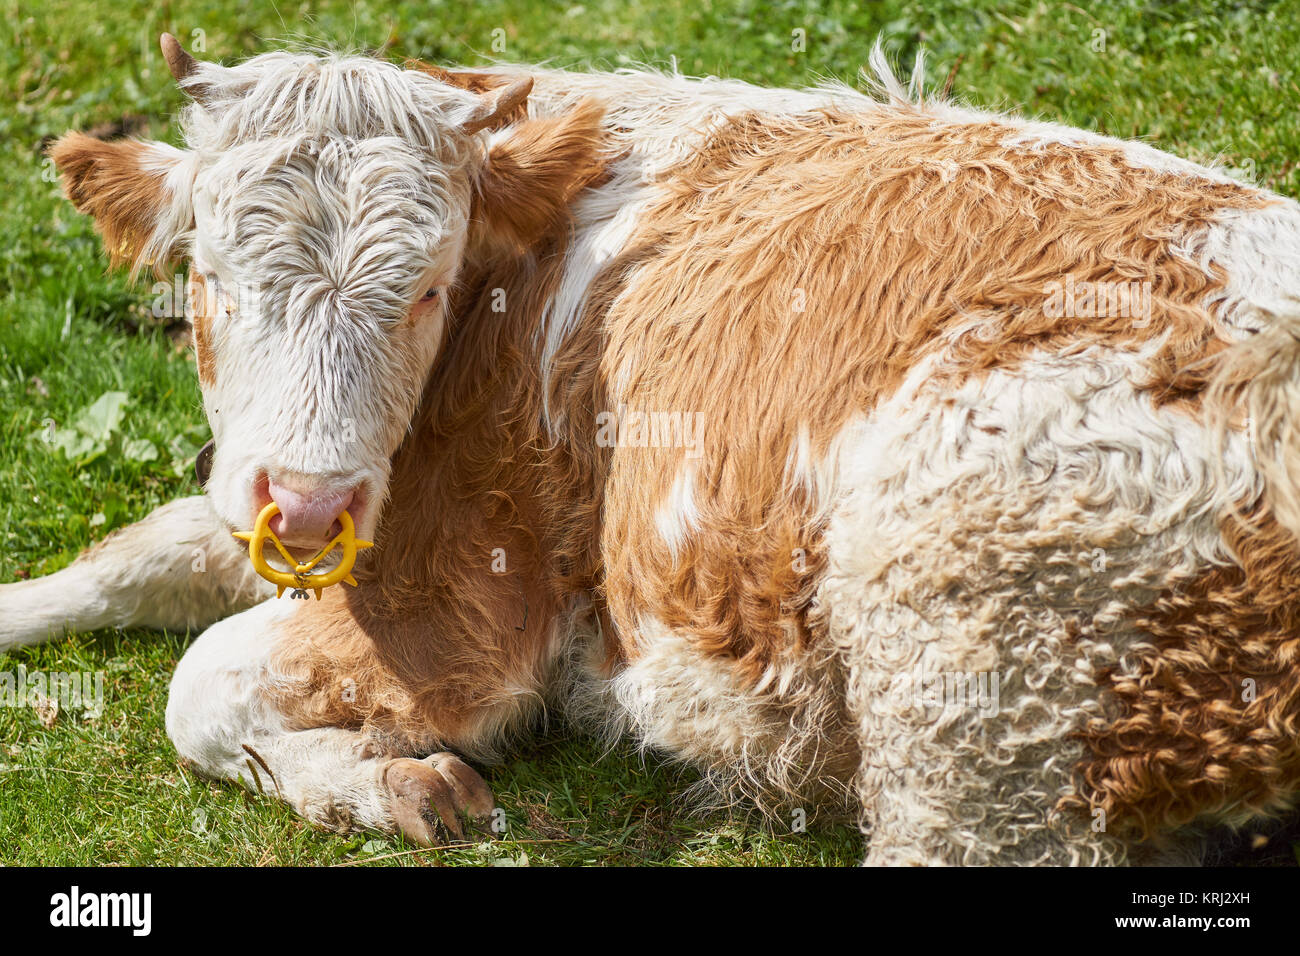 Young Swiss steer bullock with nose ring - Bernese Oberland, Switzerland Stock Photo